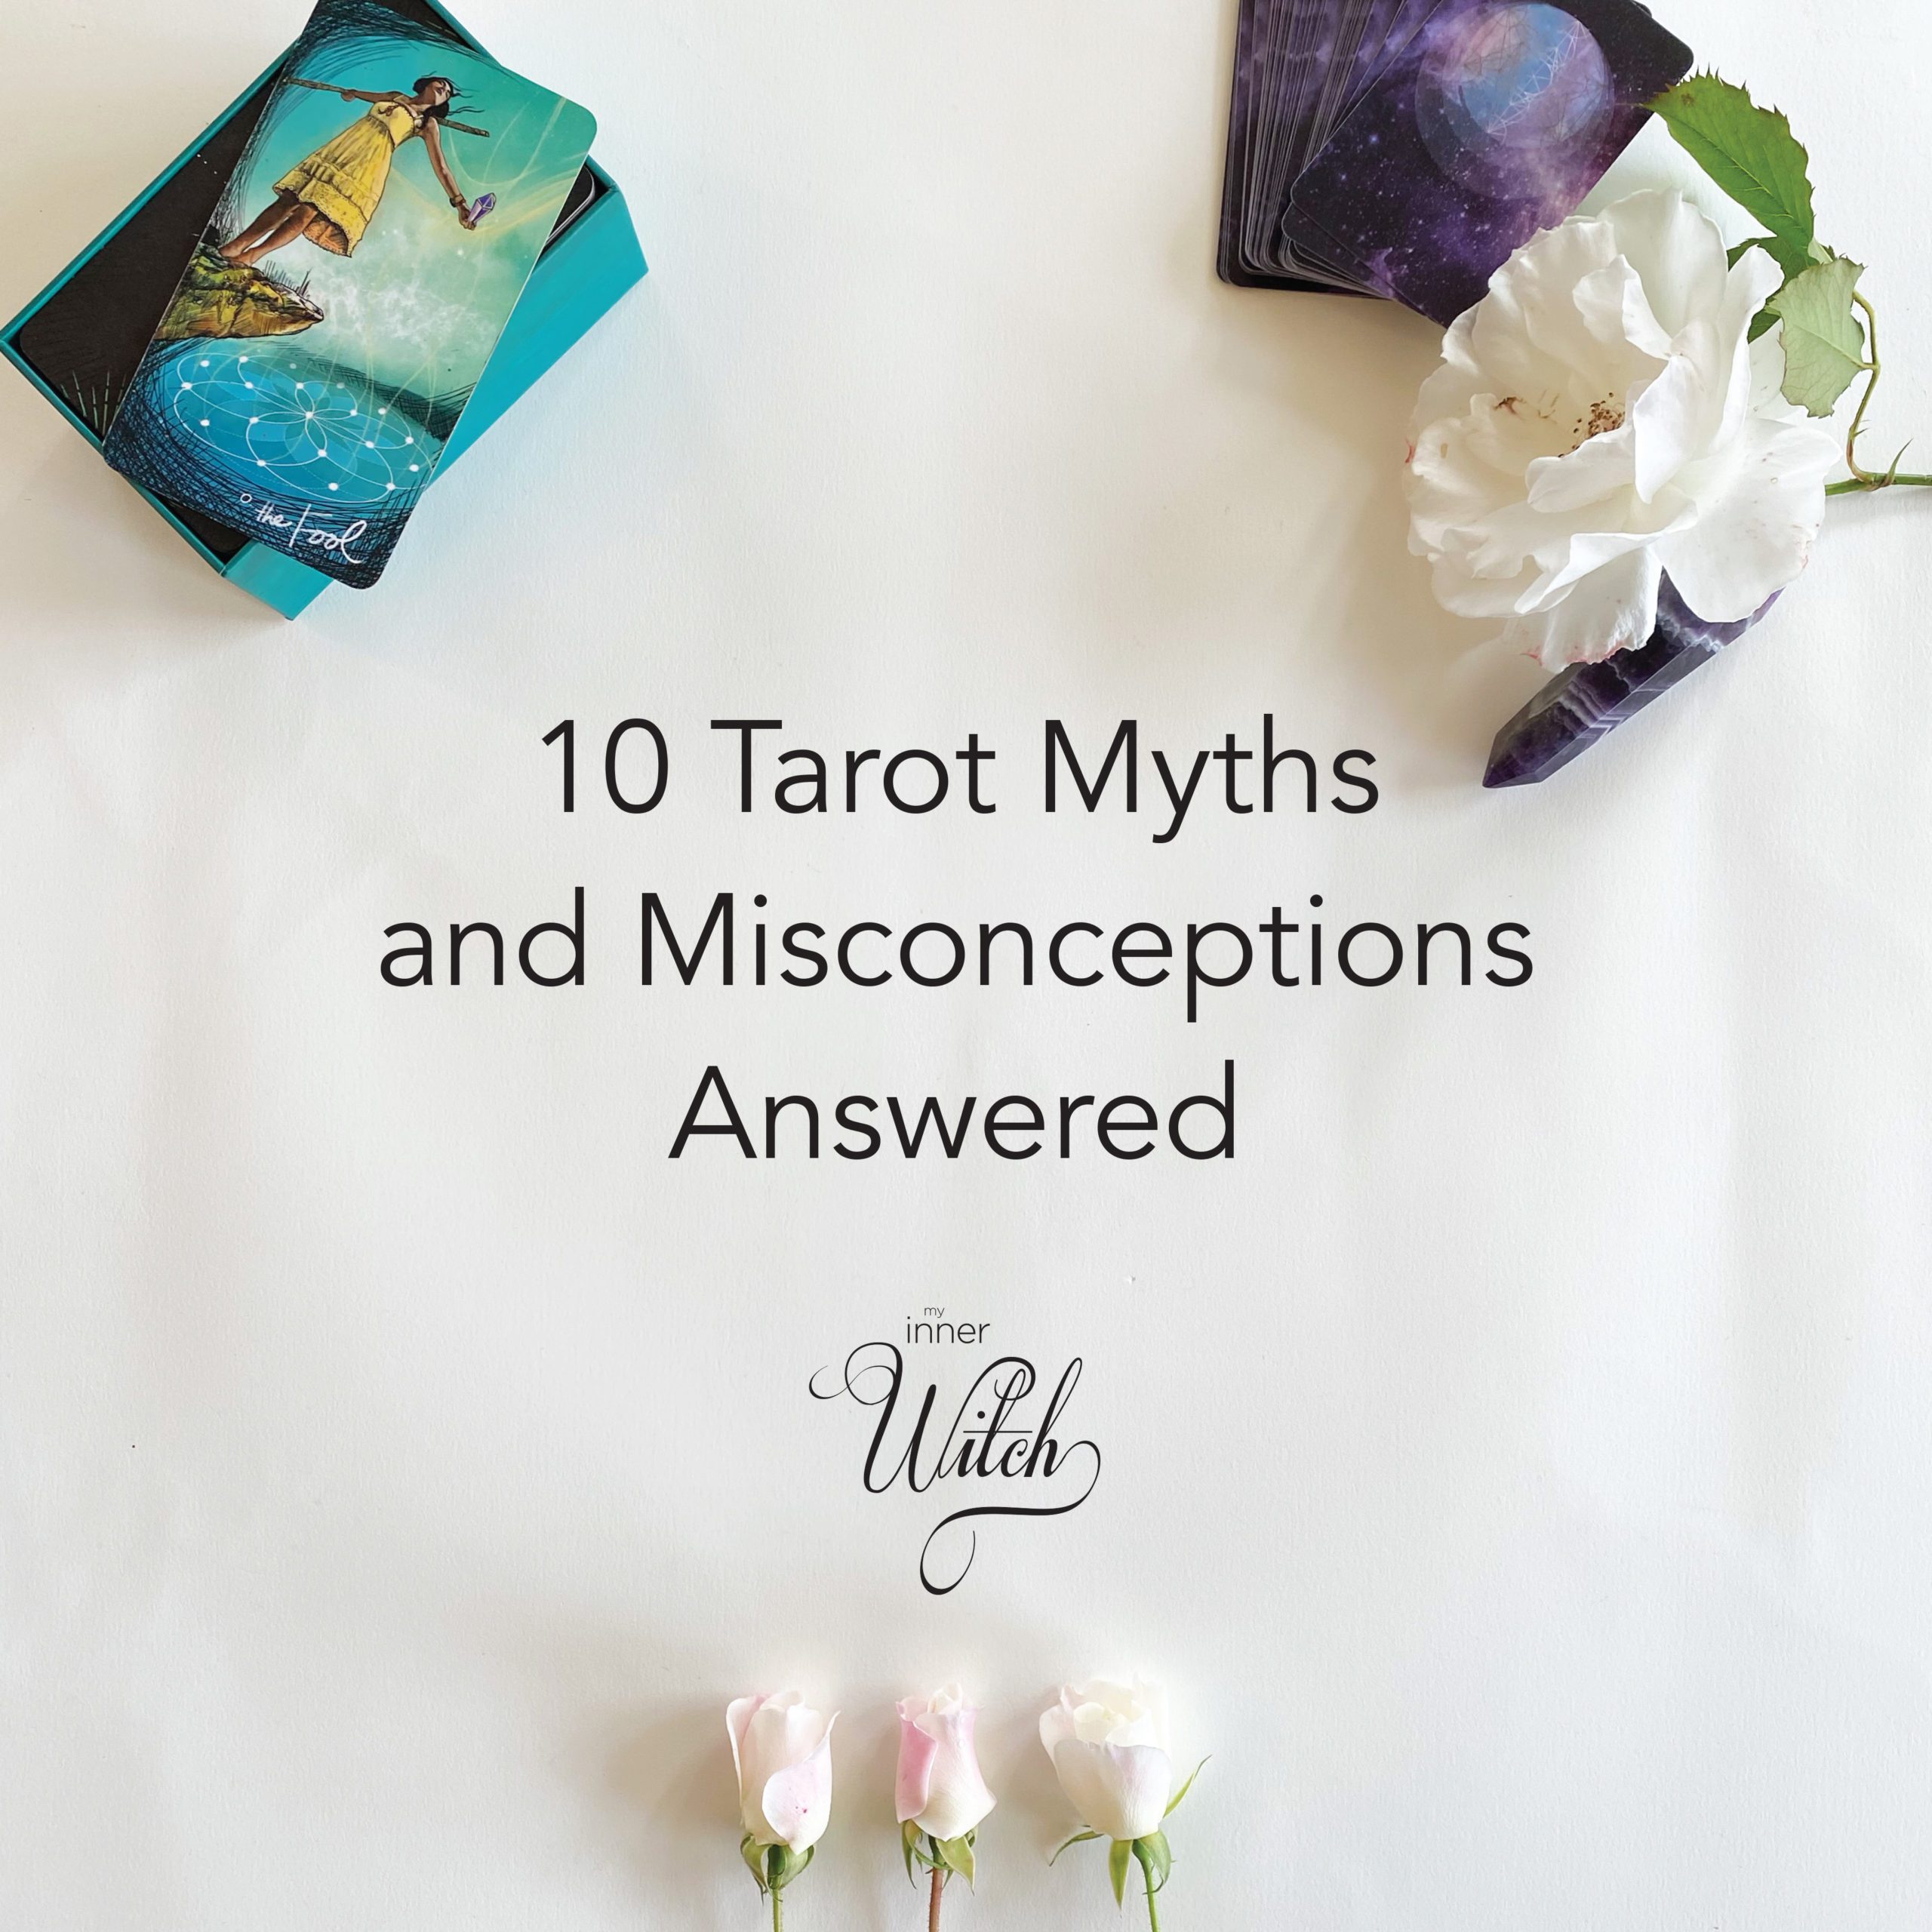 10 Tarot Myths and Misconceptions Answered